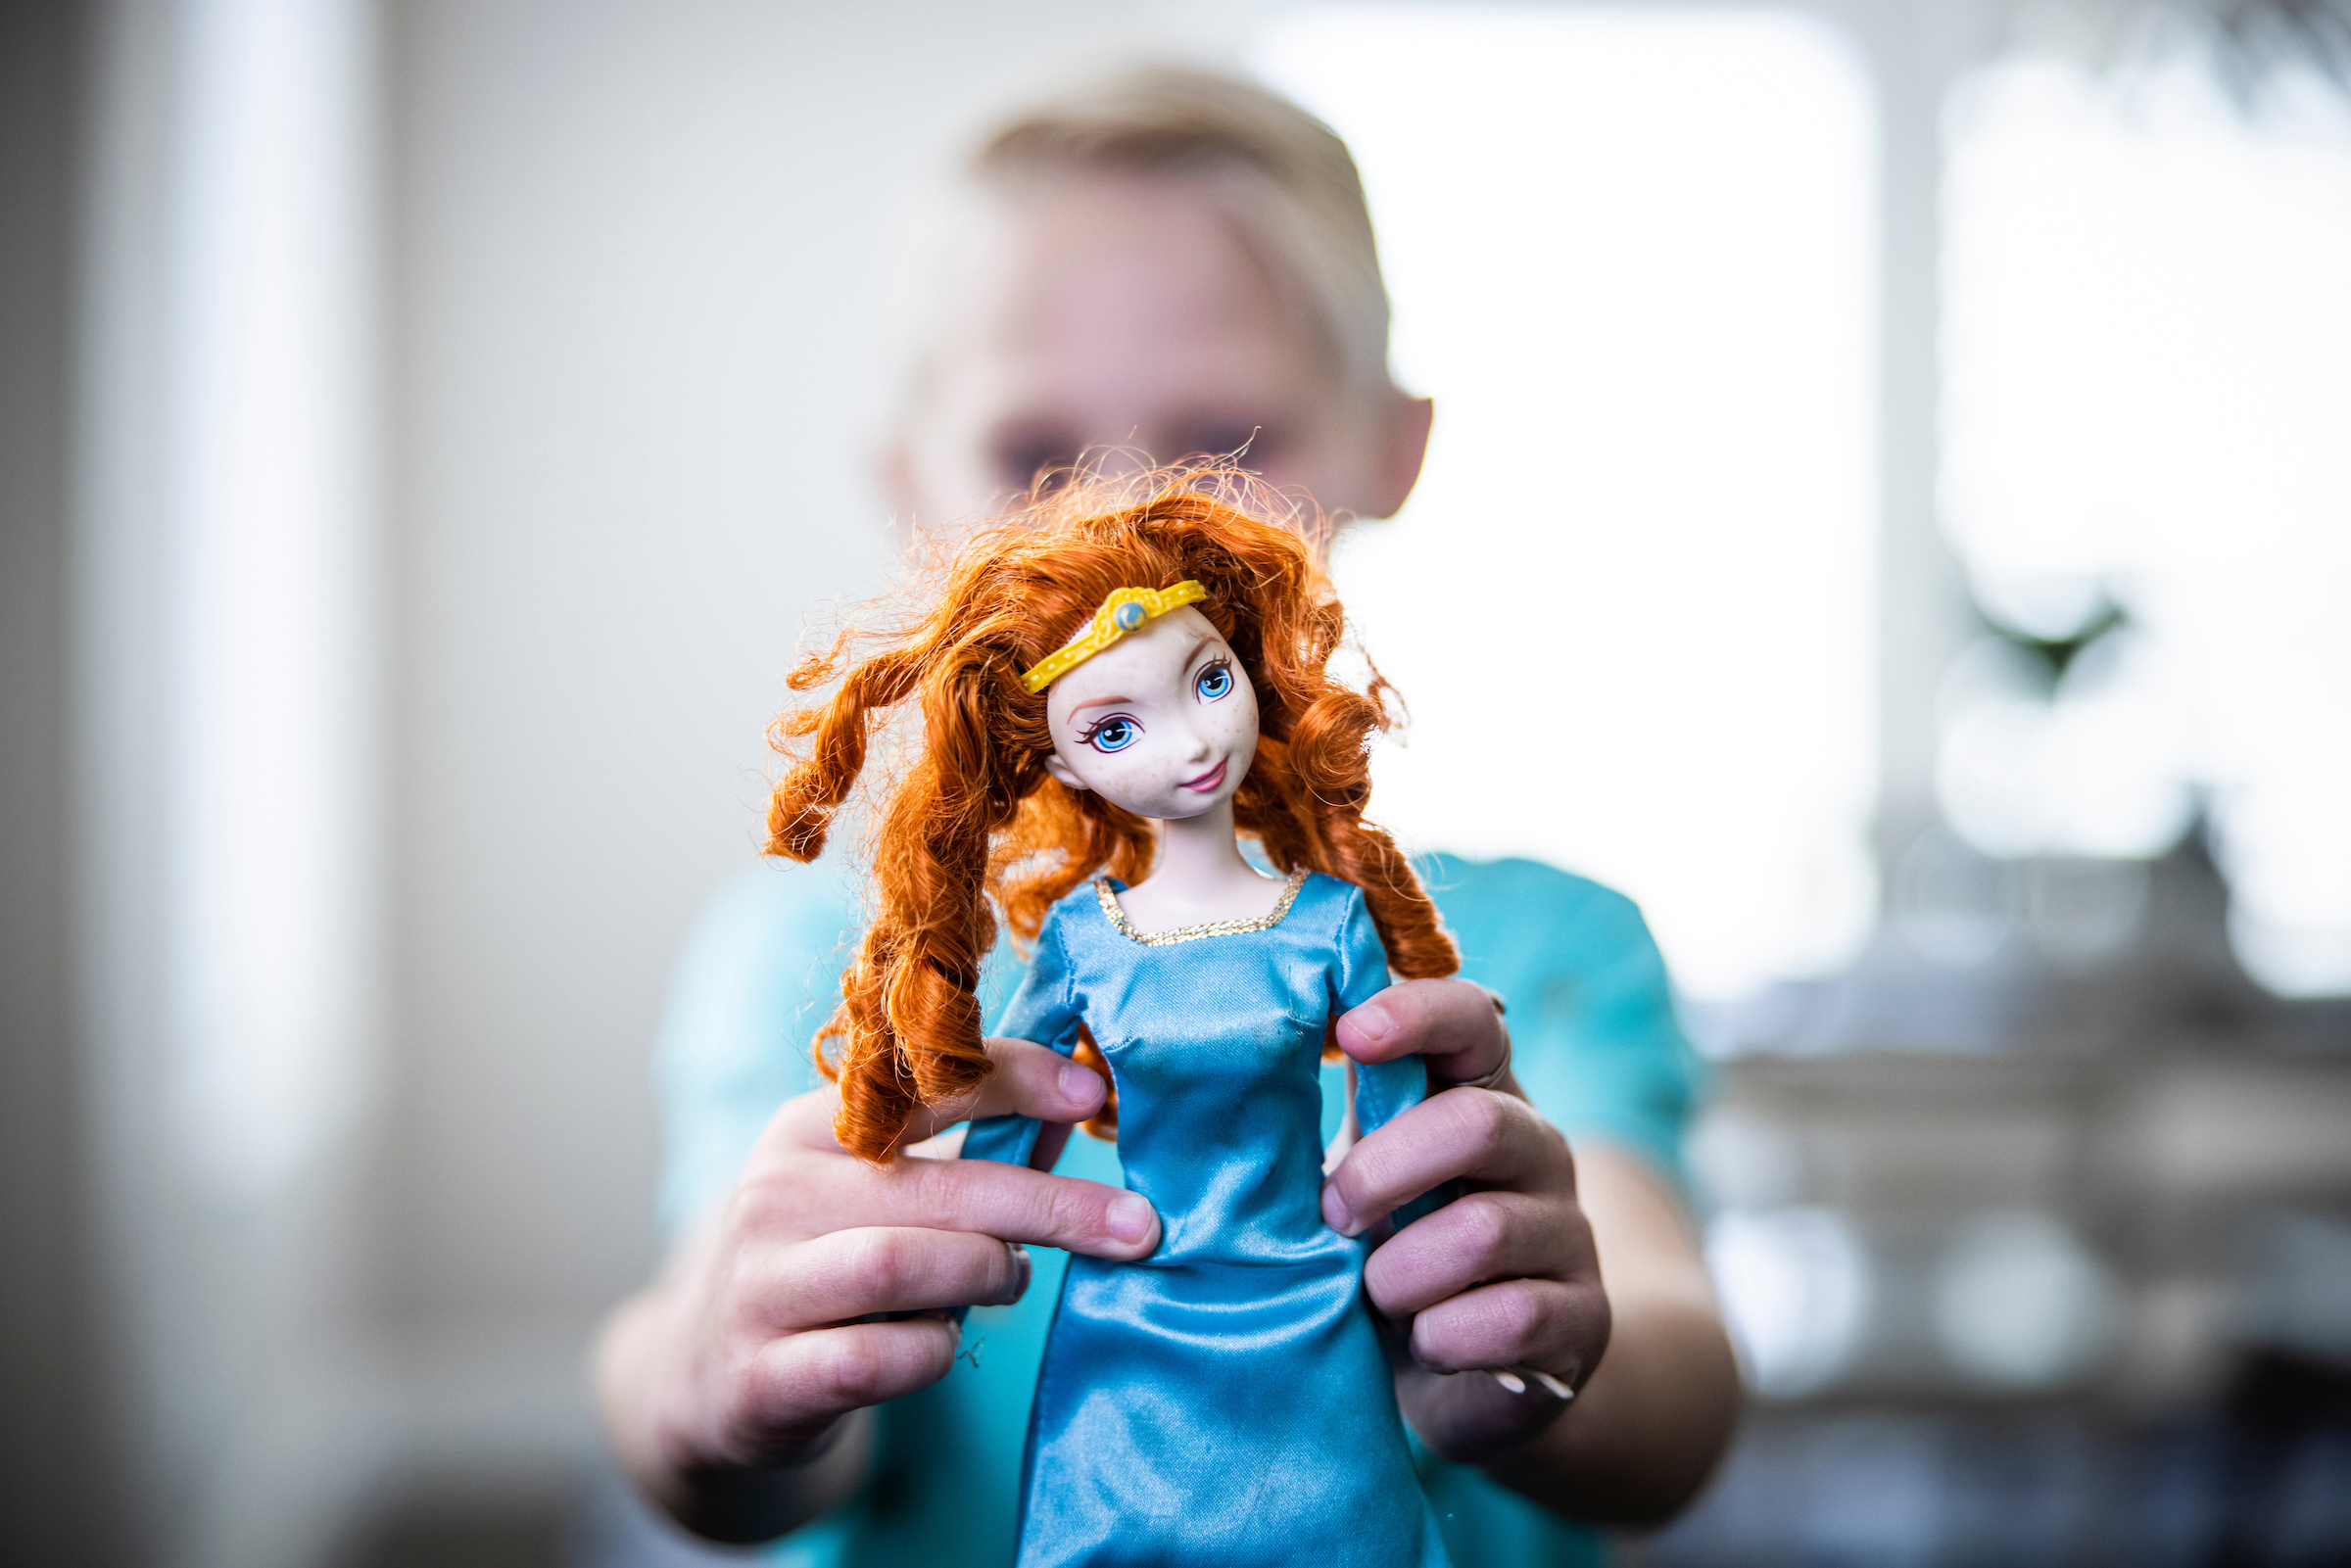 Research from BYU indicates that engagement with princess culture has a positive impact on child development over time. (Nate Edwards/BYU Photo)